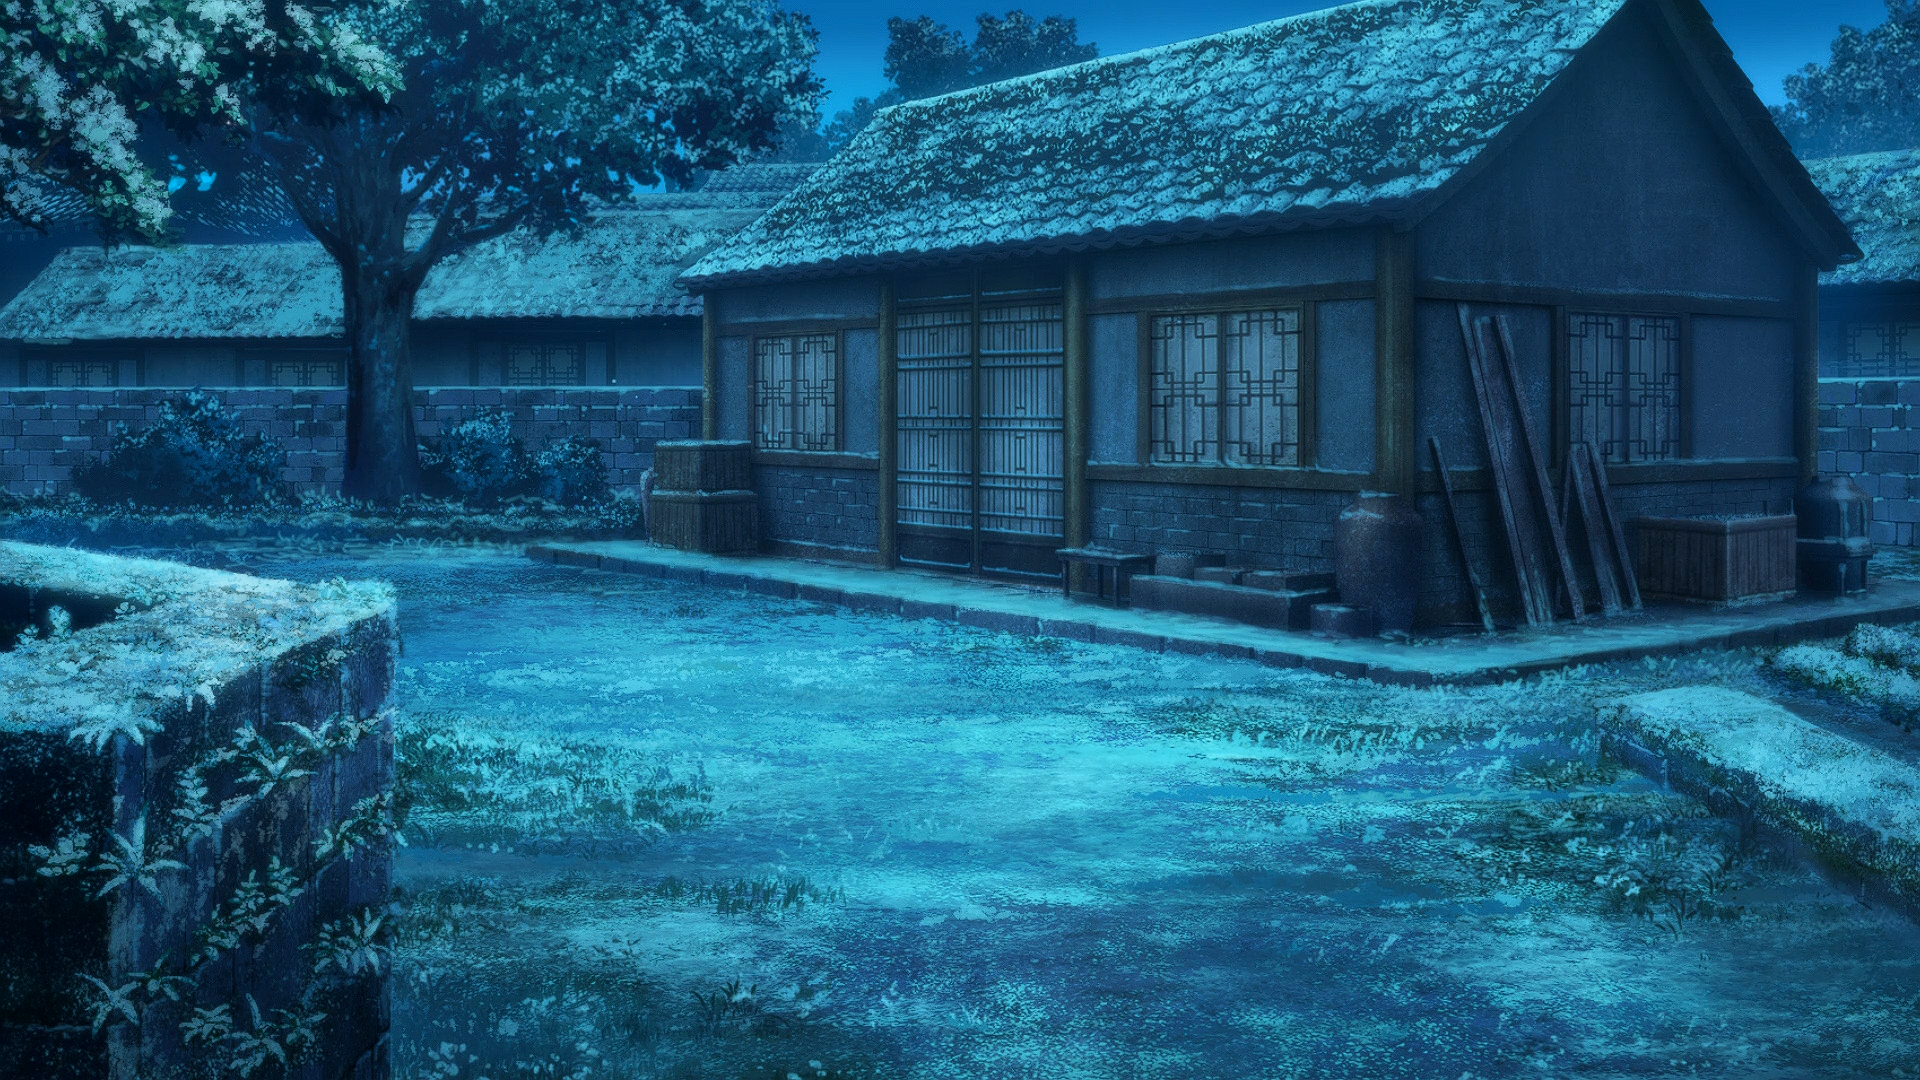 General 1920x1080 The Apothecary Diaries winter snow Asian architecture Japanese night anime screen shot